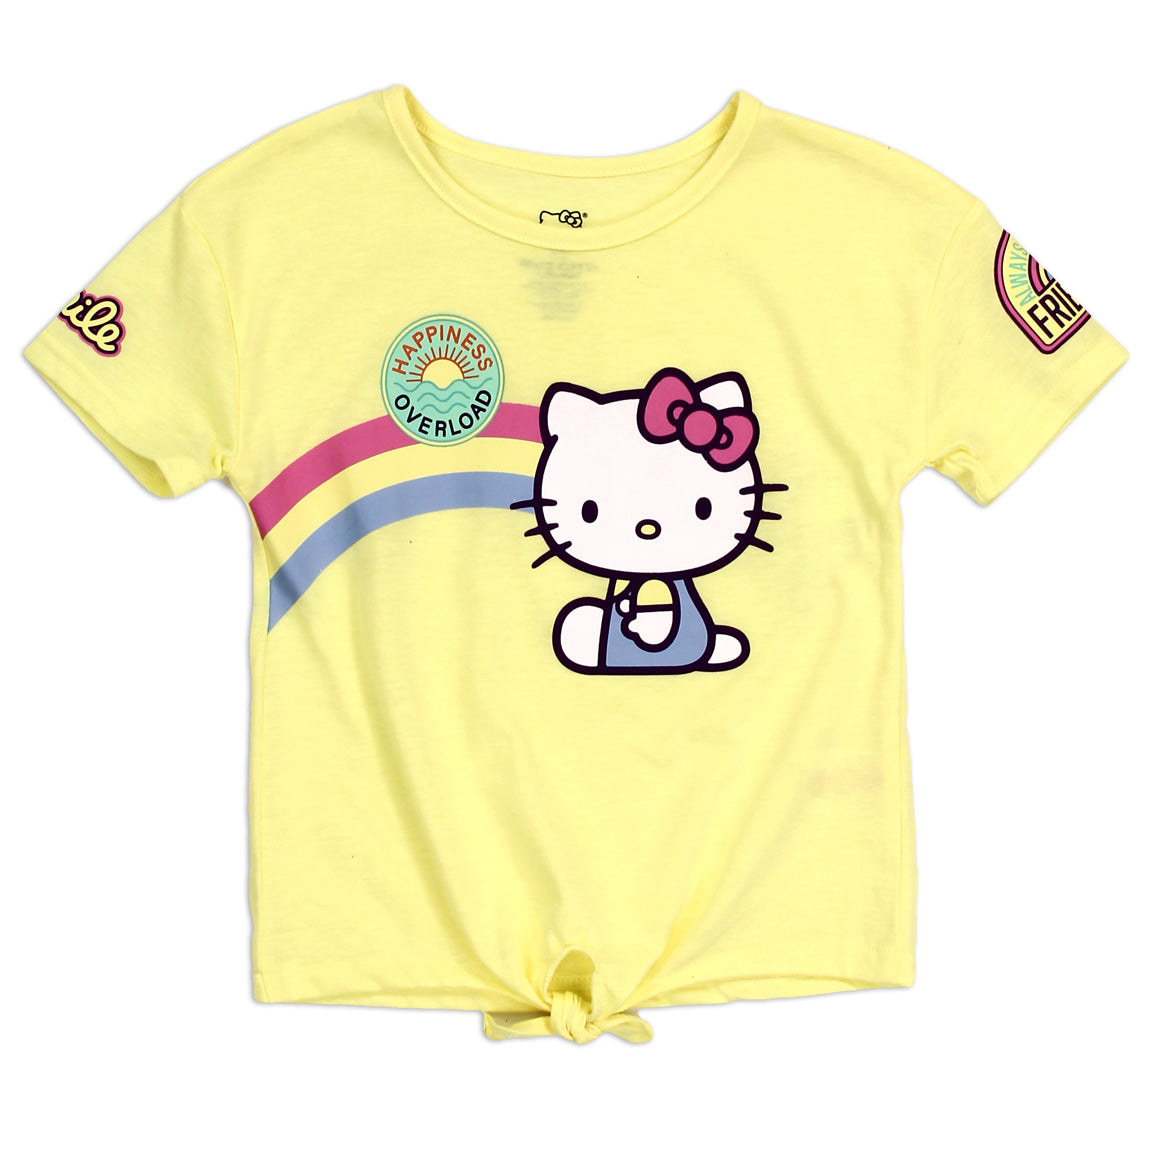 HELLO KITTY Girls 4-6X Fashion Top (Pack of 6)